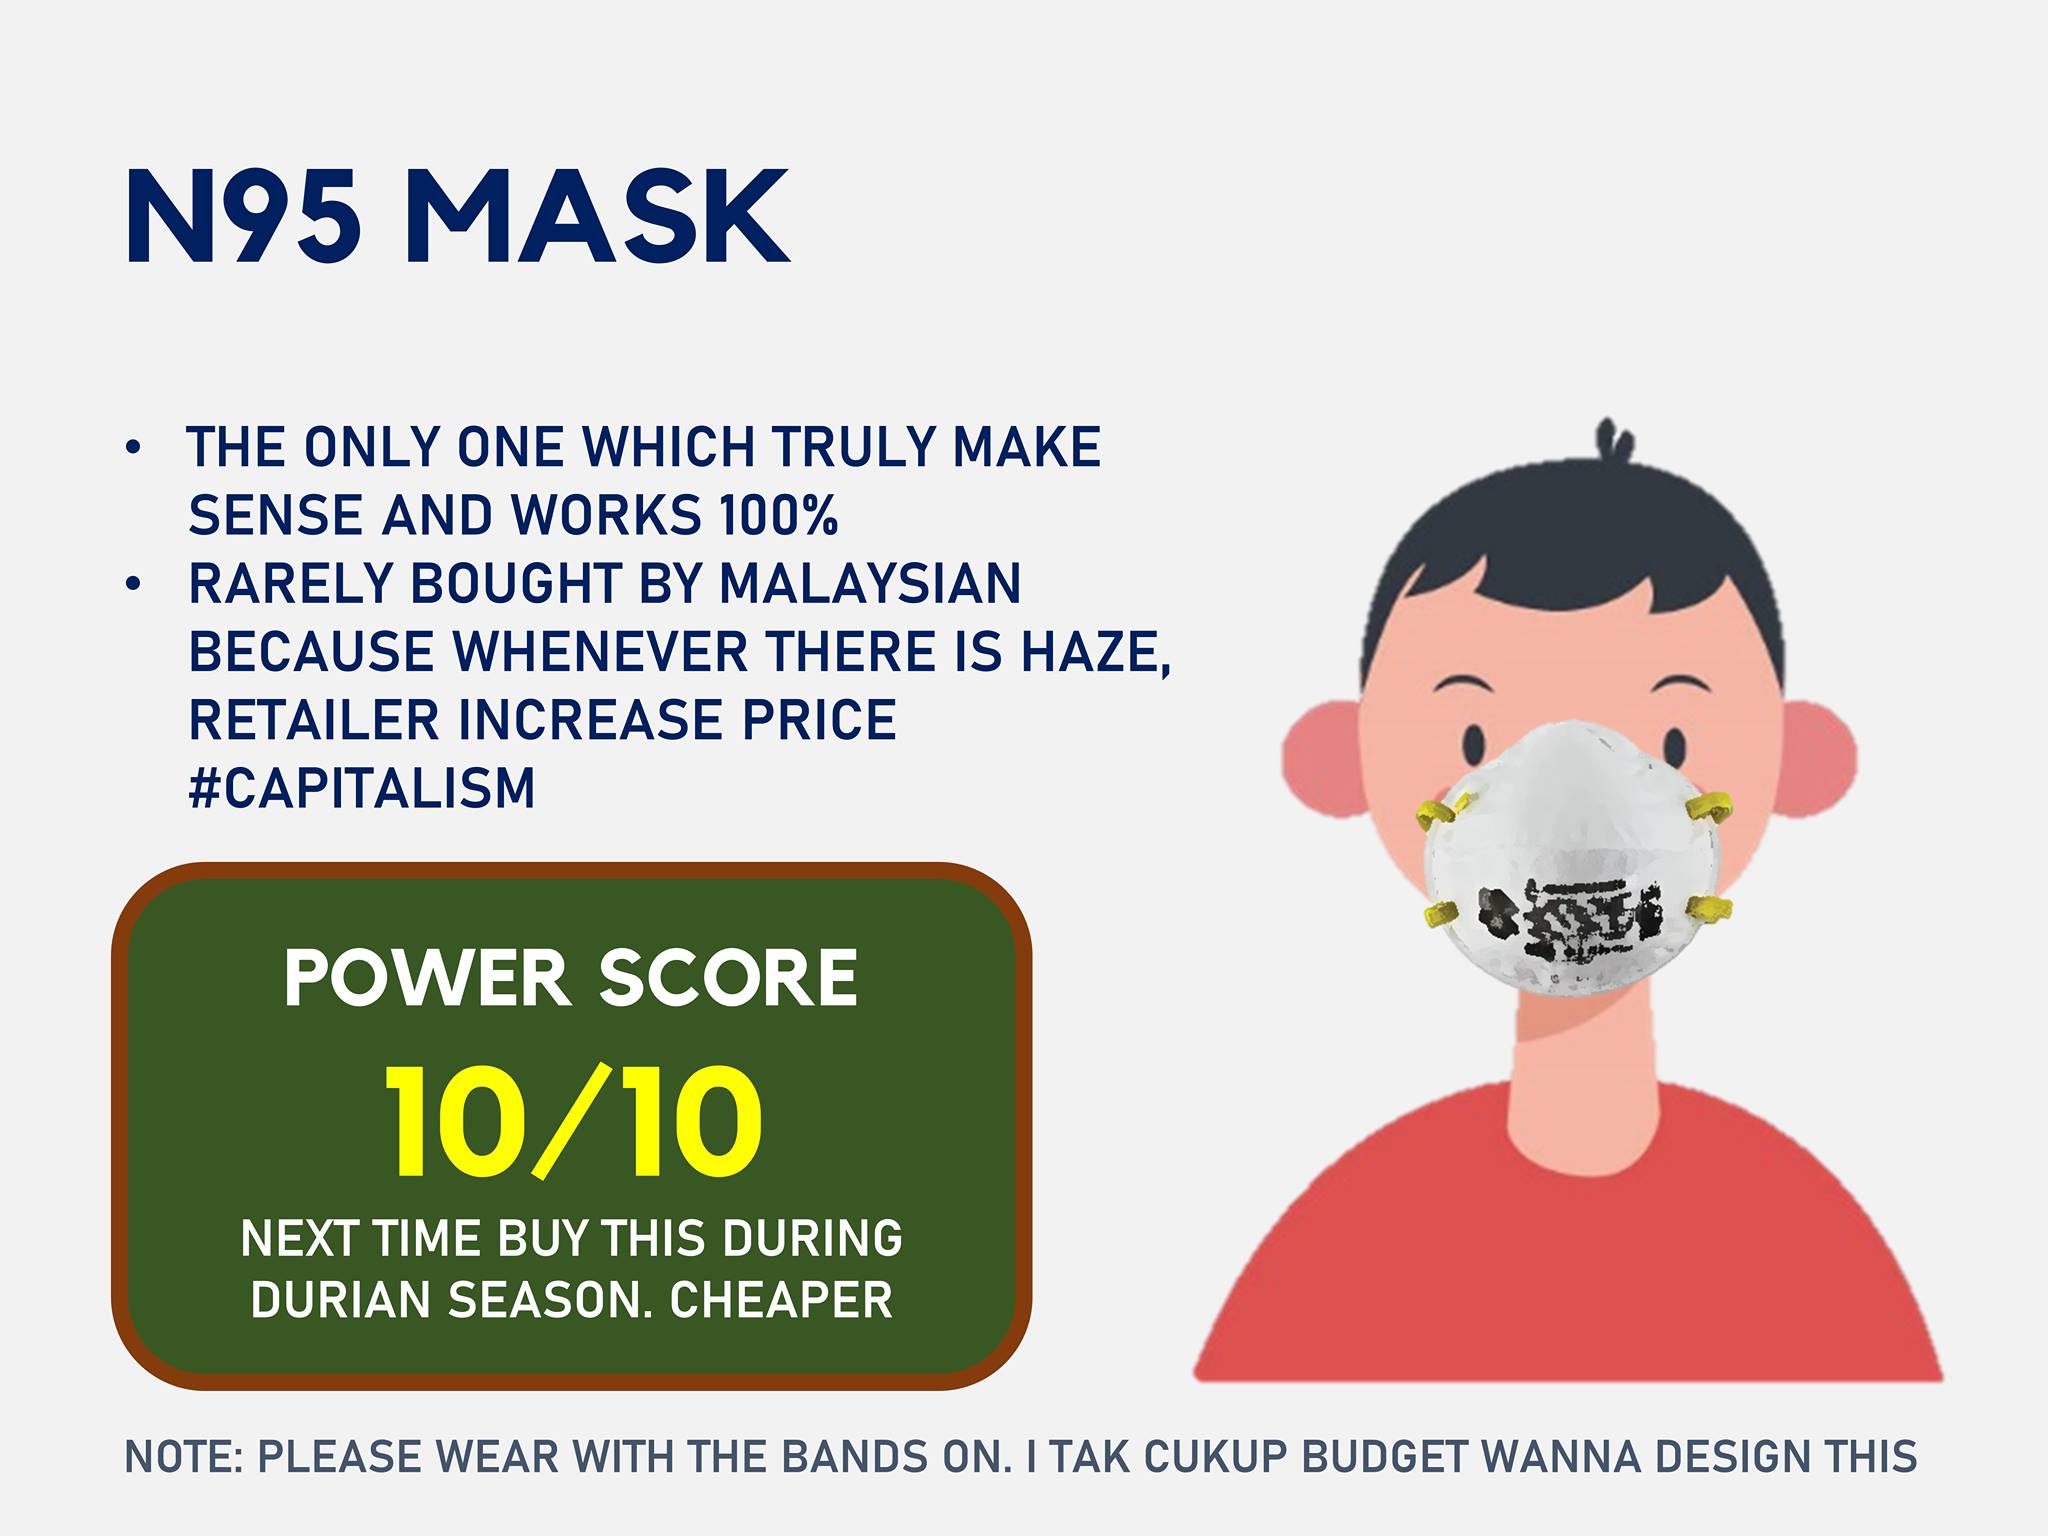 N95 Mask Infographic